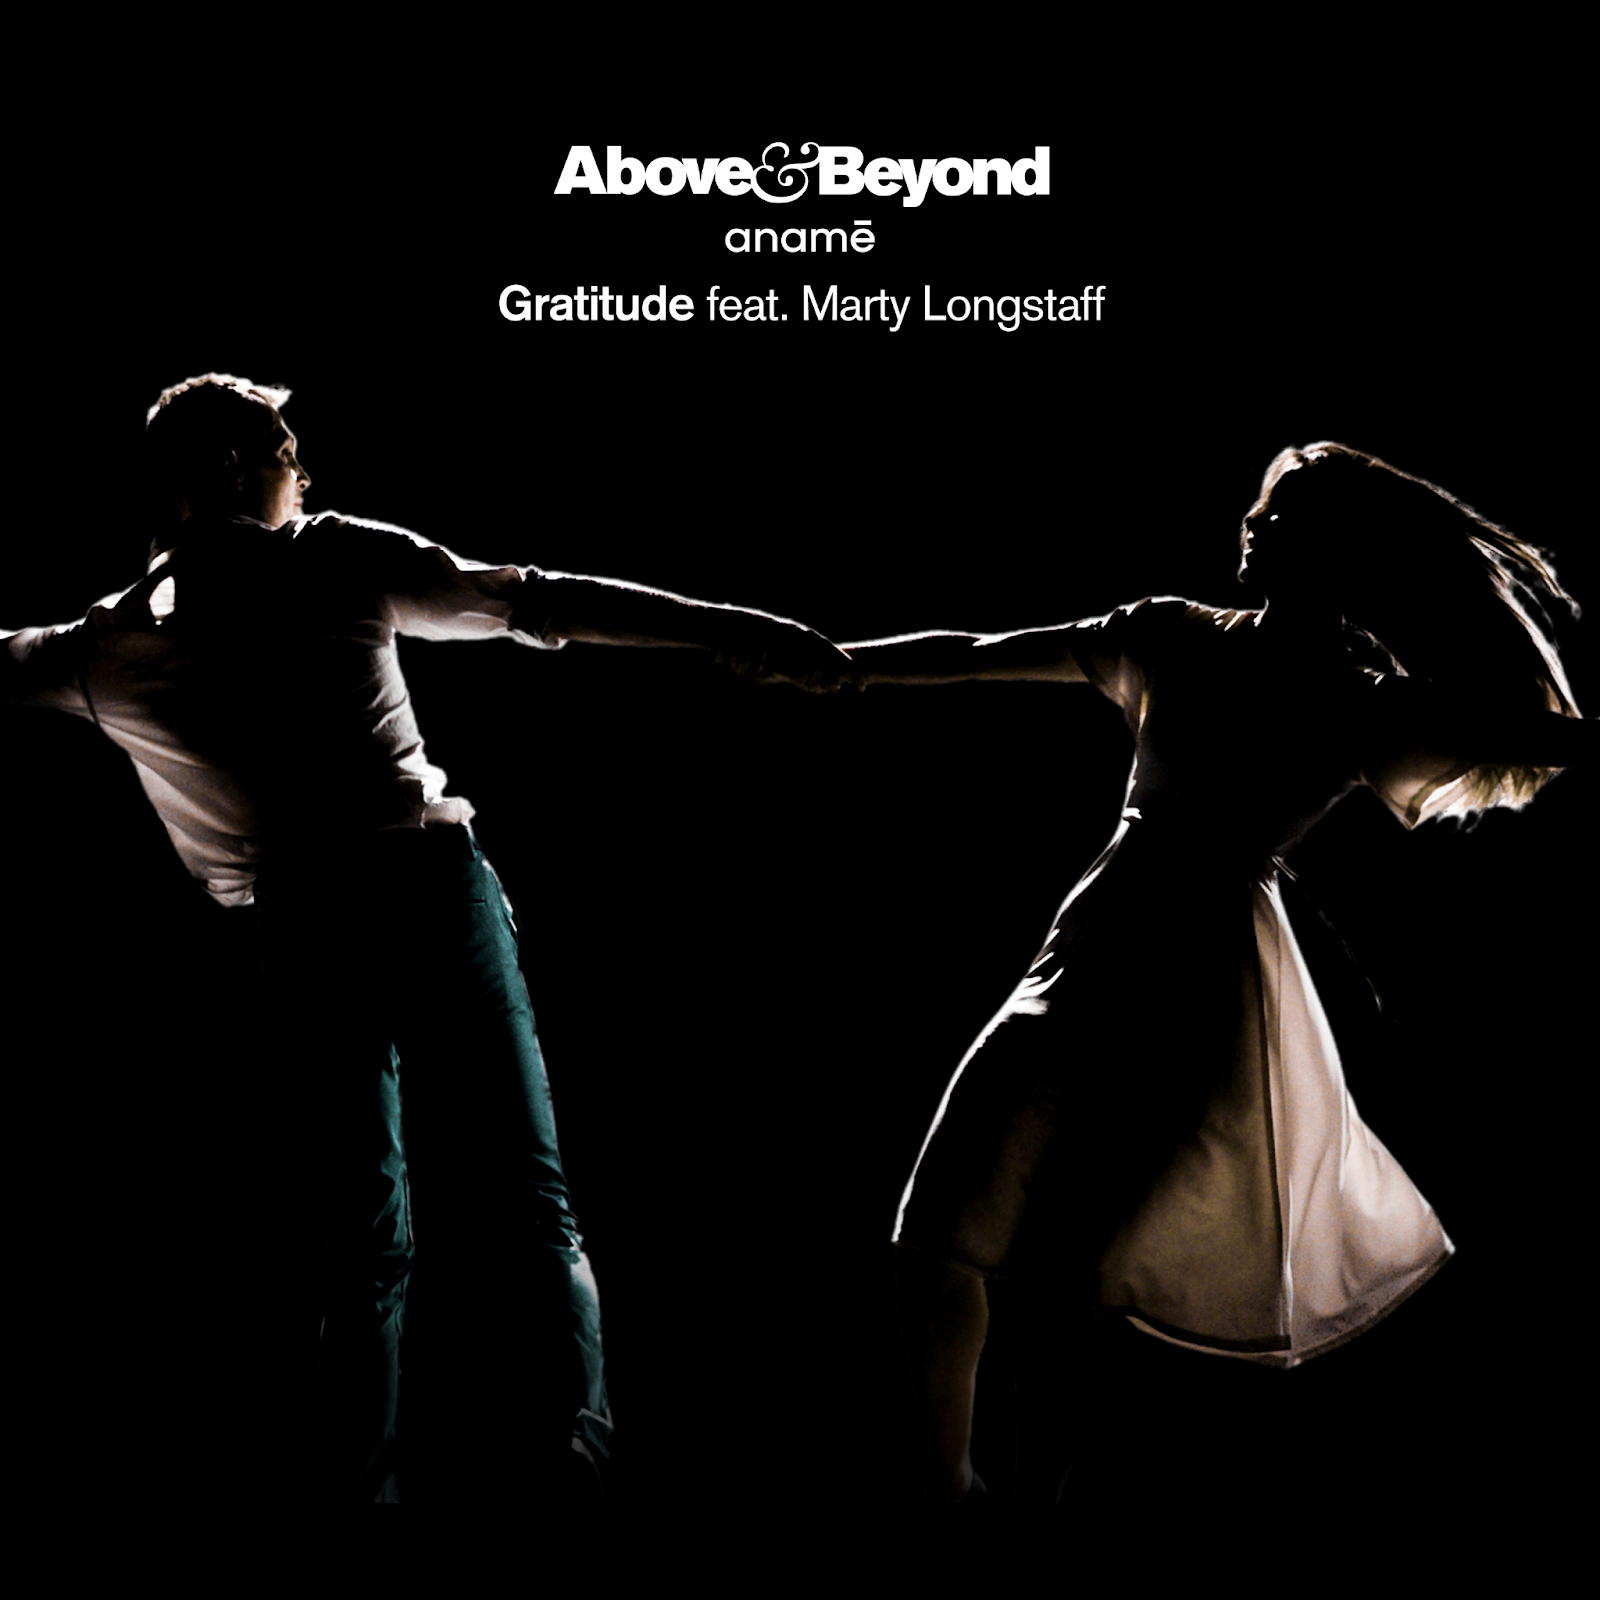 Above and Beyond and anamē feat. Marty Longstaff presents Gratitude on Anjunabeats